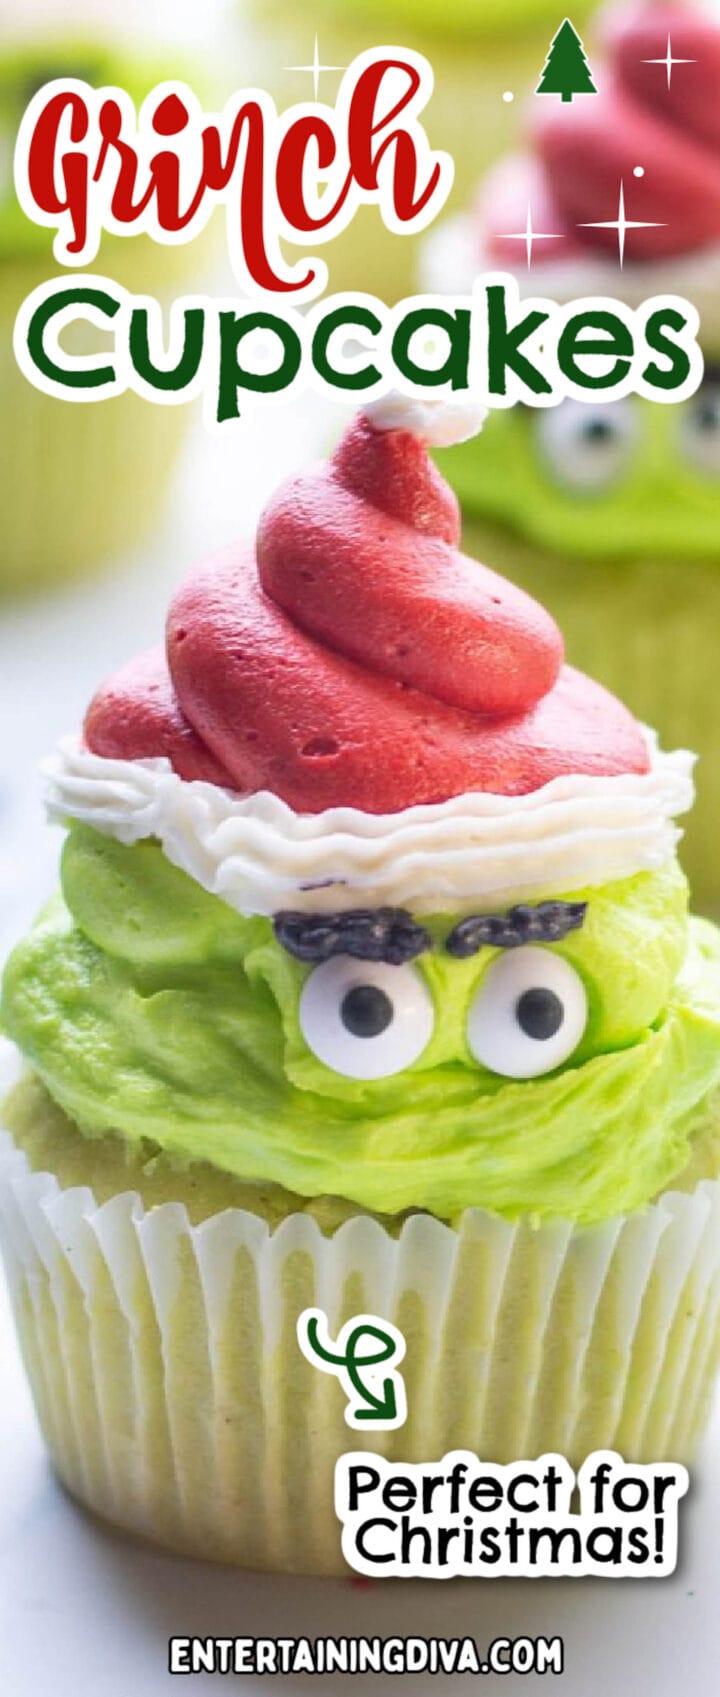 Grinch cupcakes with a heart inside.